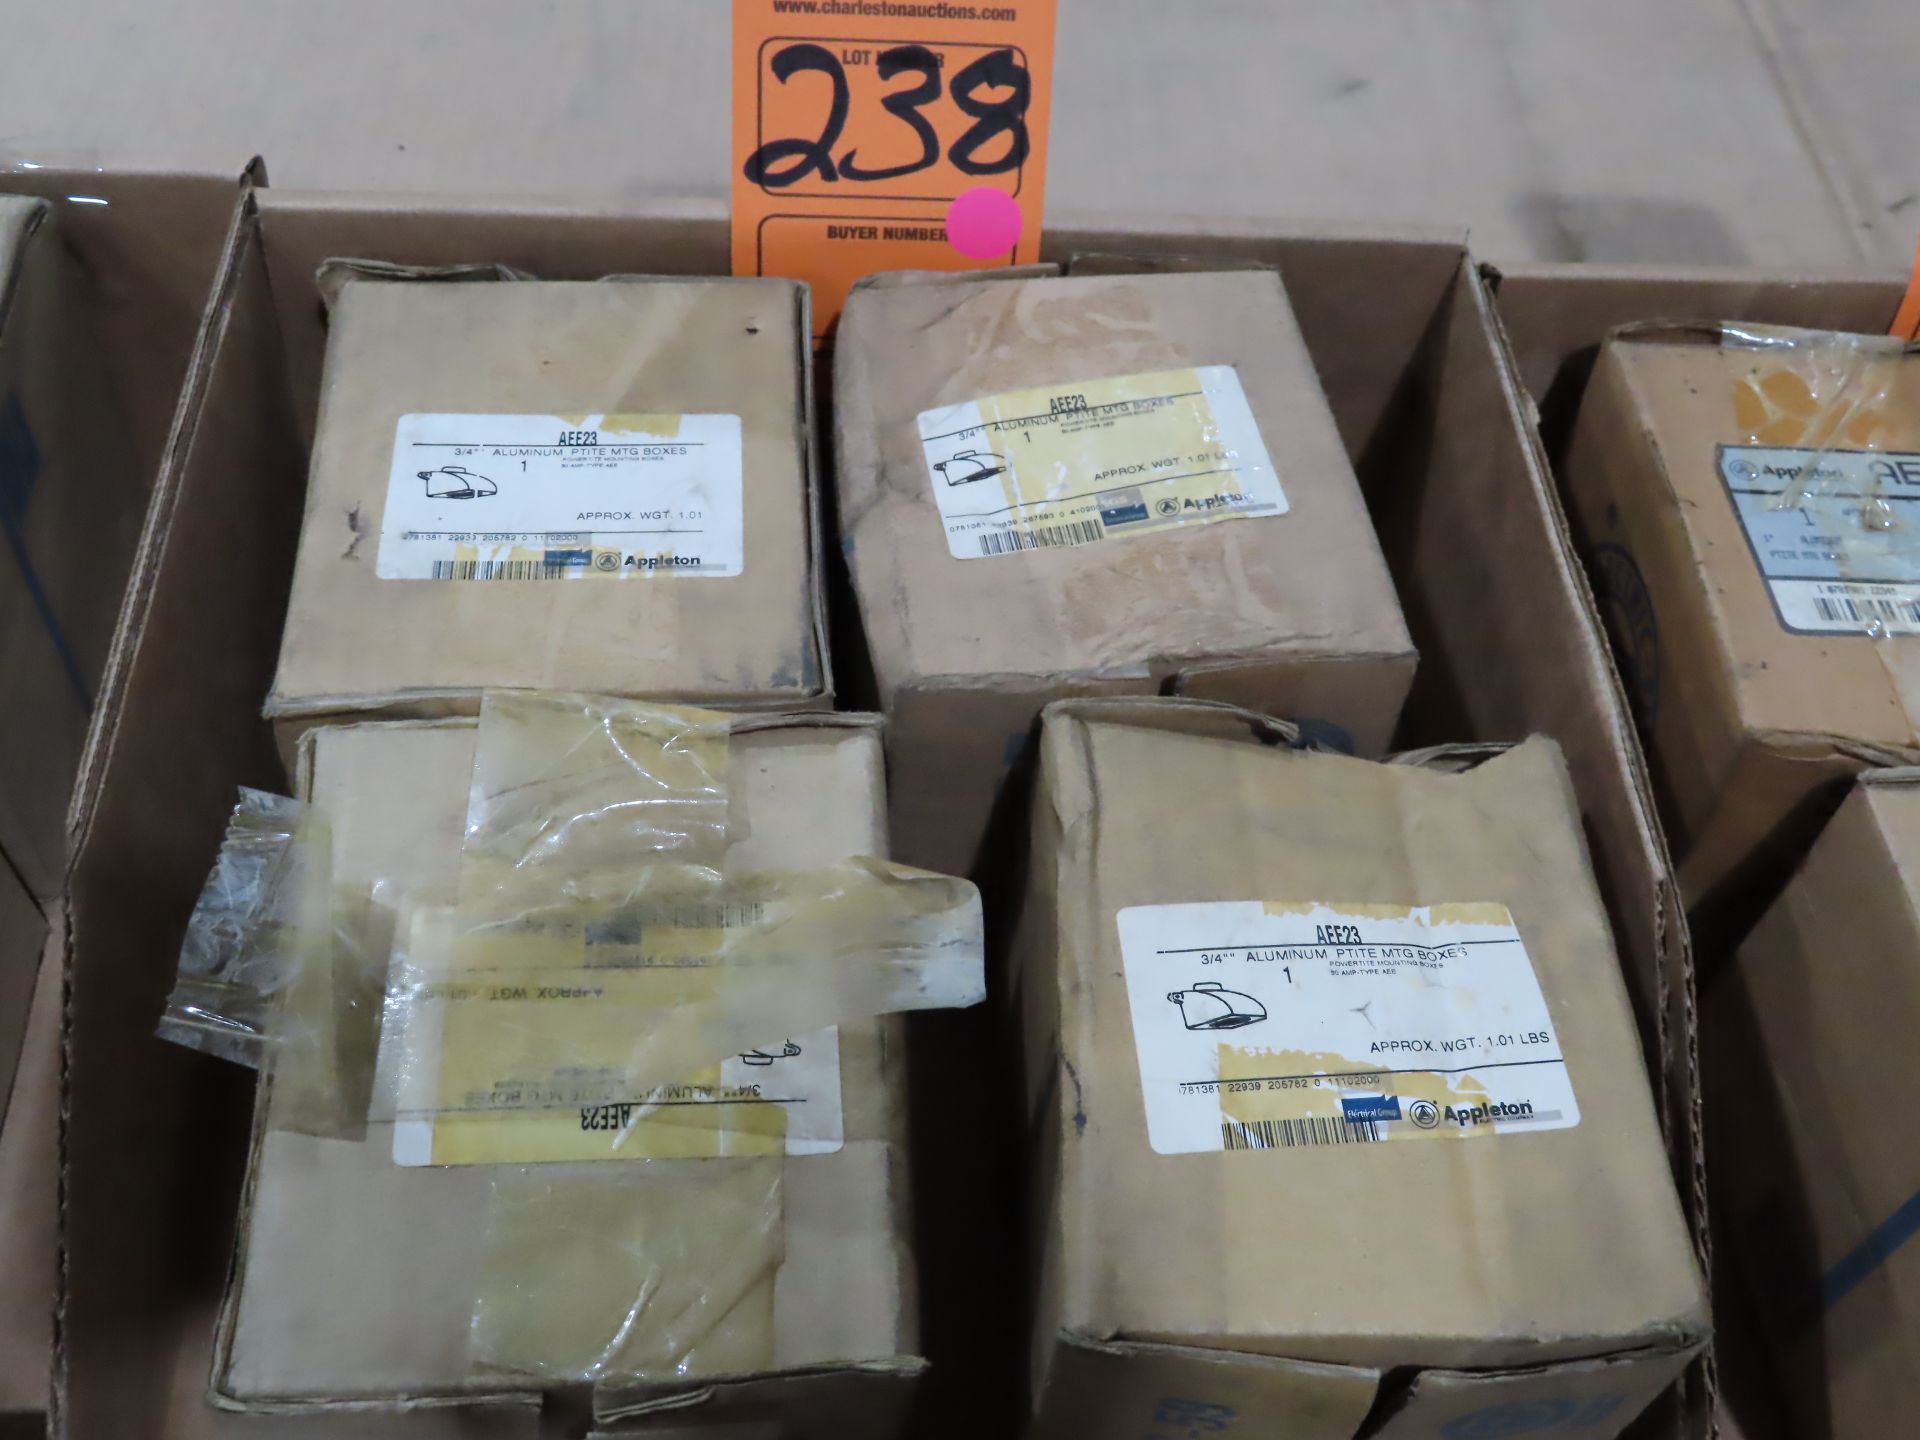 Qty 4 Appleton model AEE23, new in boxes, as always with Brolyn LLC auctions, all lots can be picked